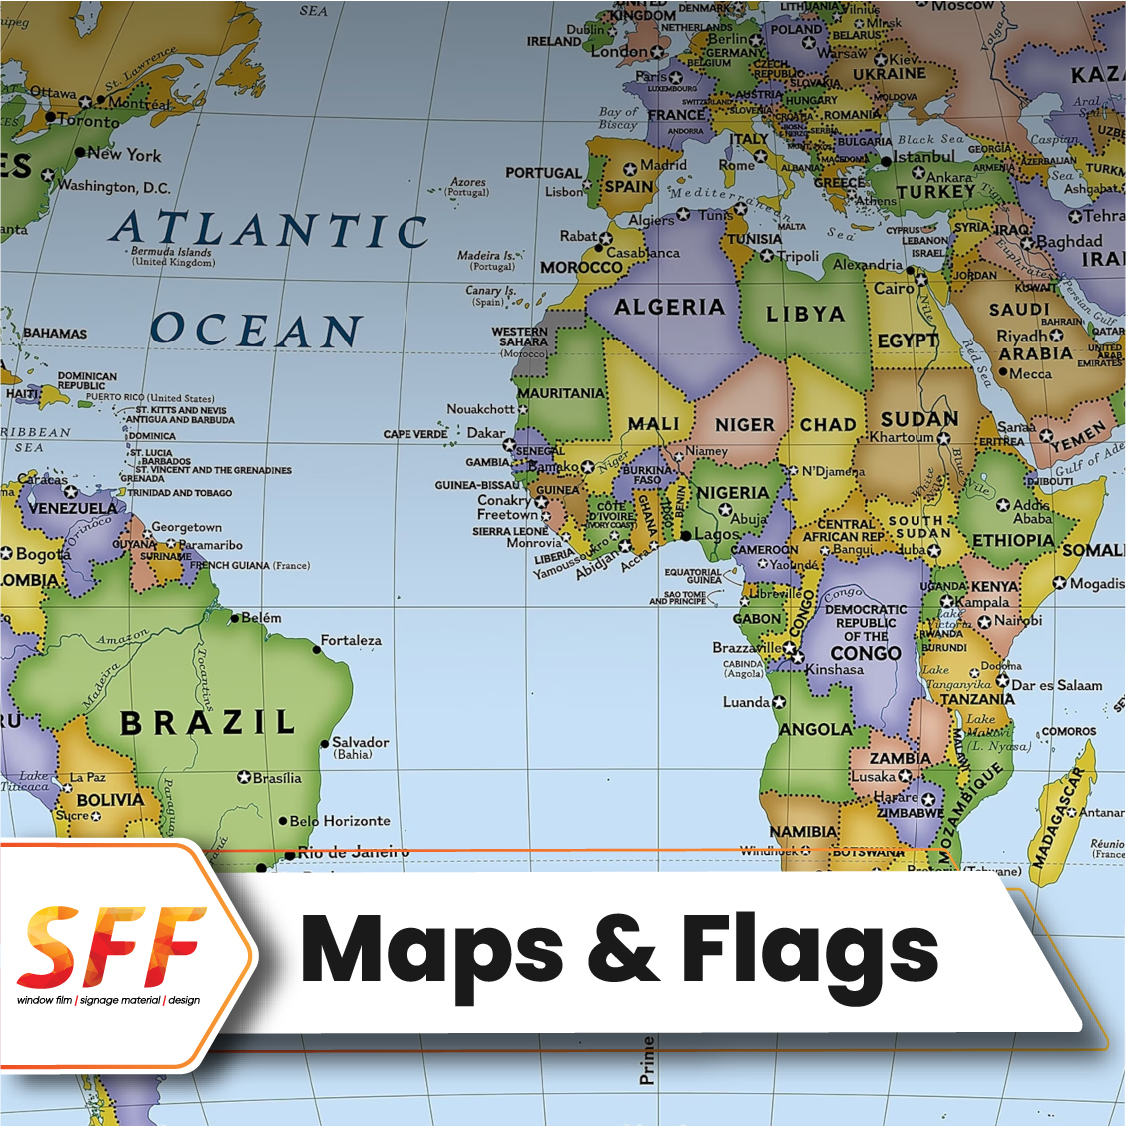 Maps & Flags